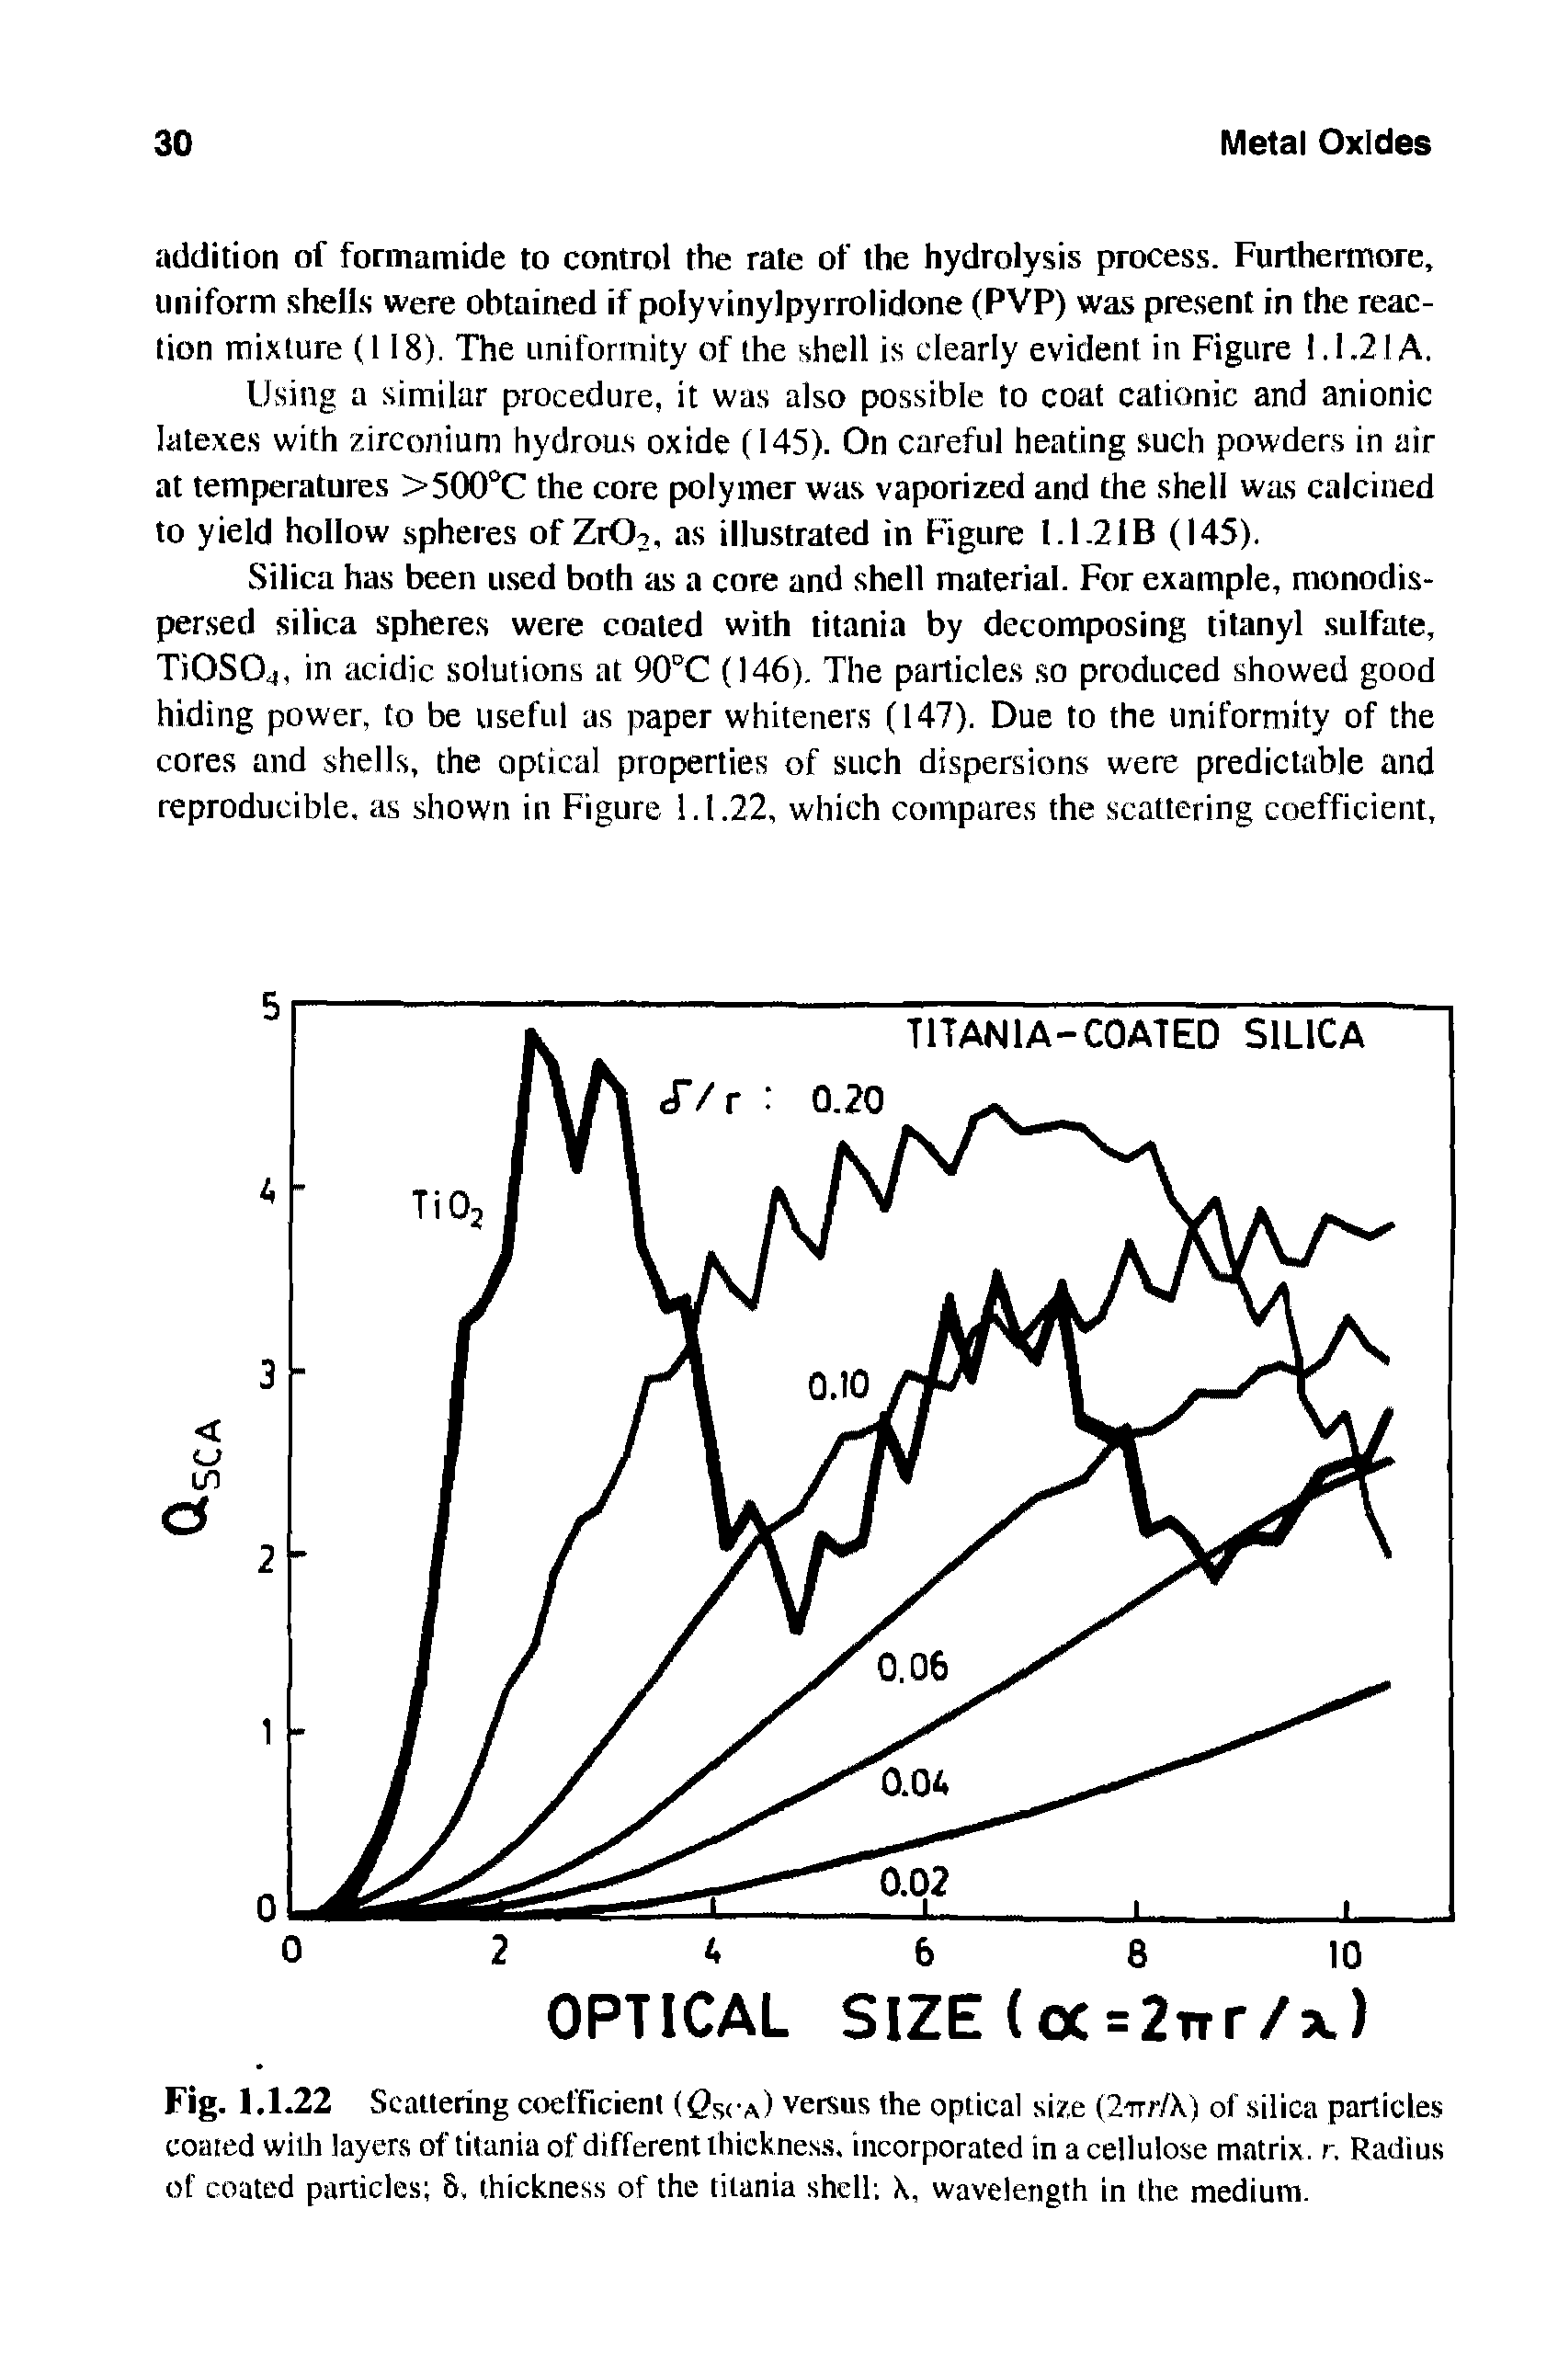 Fig. 1,1.22 Scattering coefficient ( Soa) versus the optical size (2-rrr/X) of silica particles coated with layers of titania of different thickness, incorporated in a cellulose matrix, r. Radius of coated particles 5, thickness of the titania shell X, wavelength in the medium.